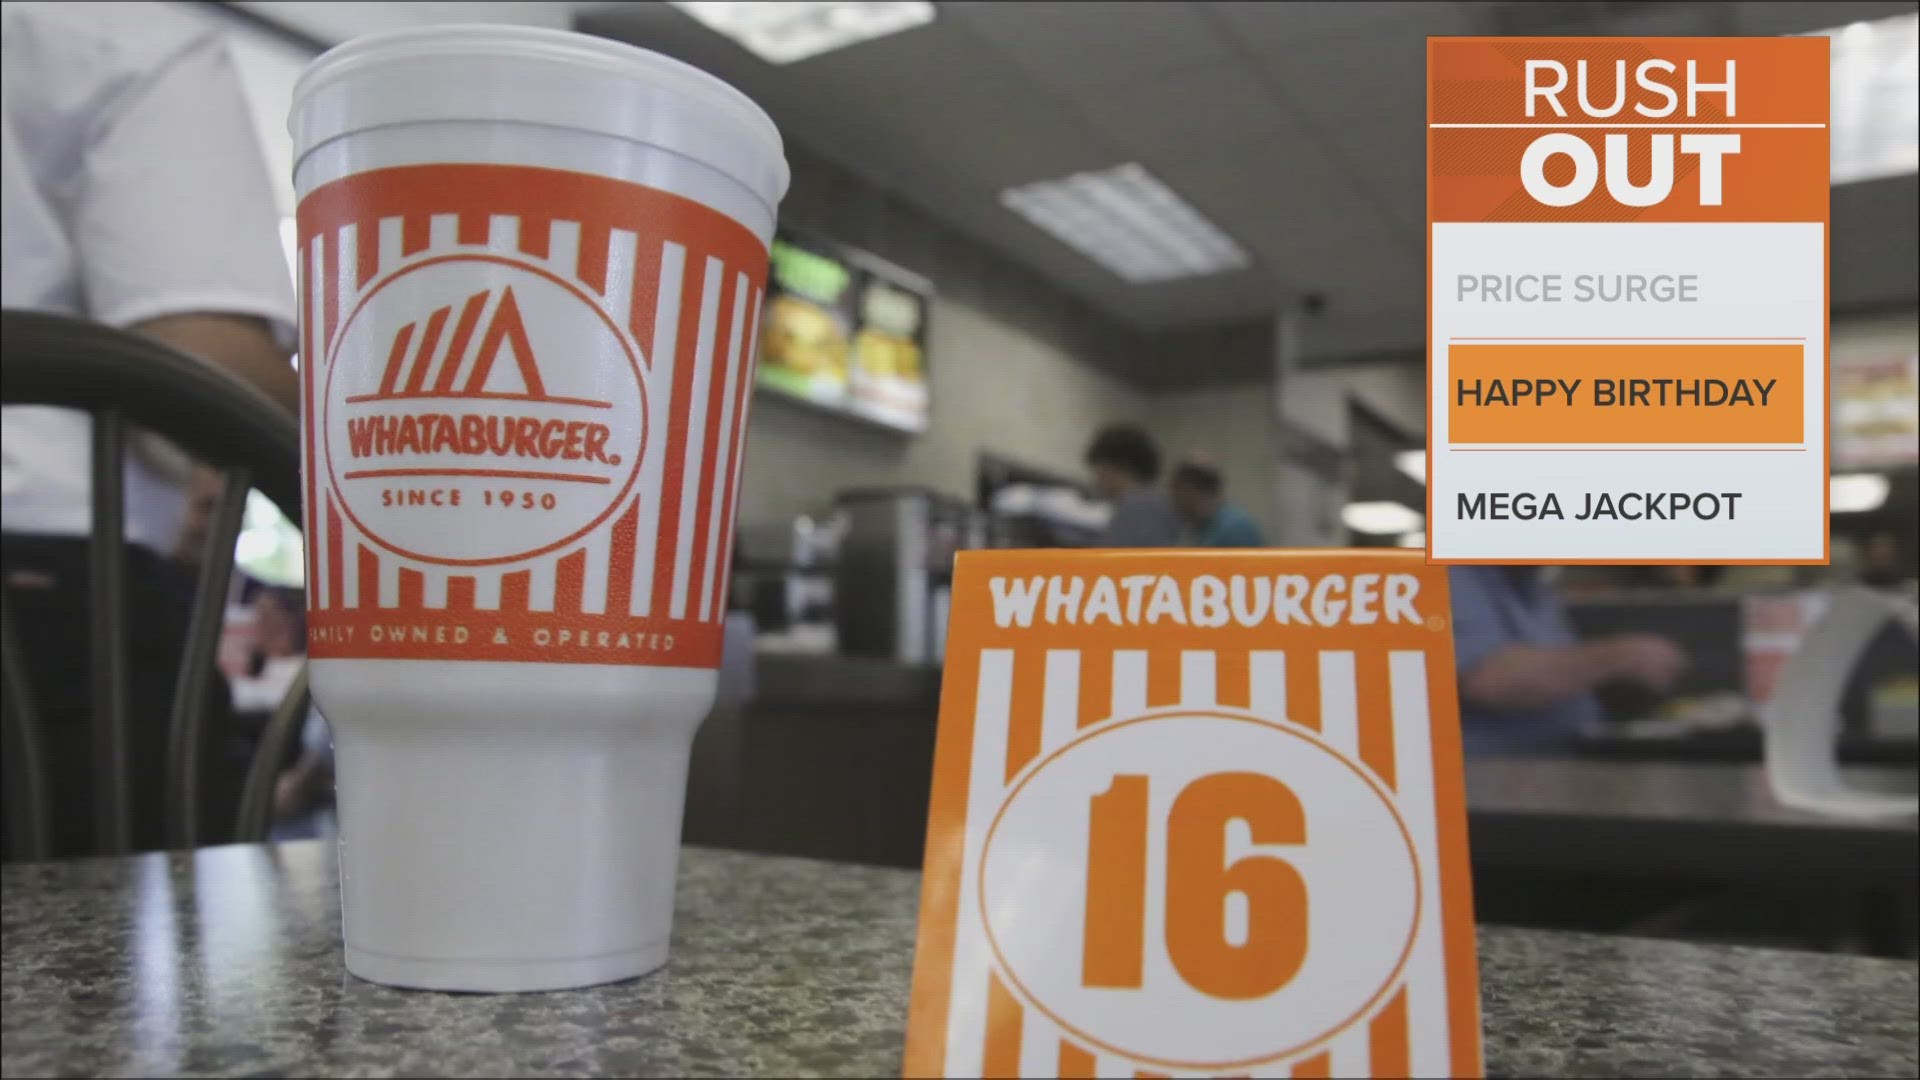 The company's celebrating its 73rd birthday by wiping out $73K in school lunch debt. Customers could also get a free Whataburger.